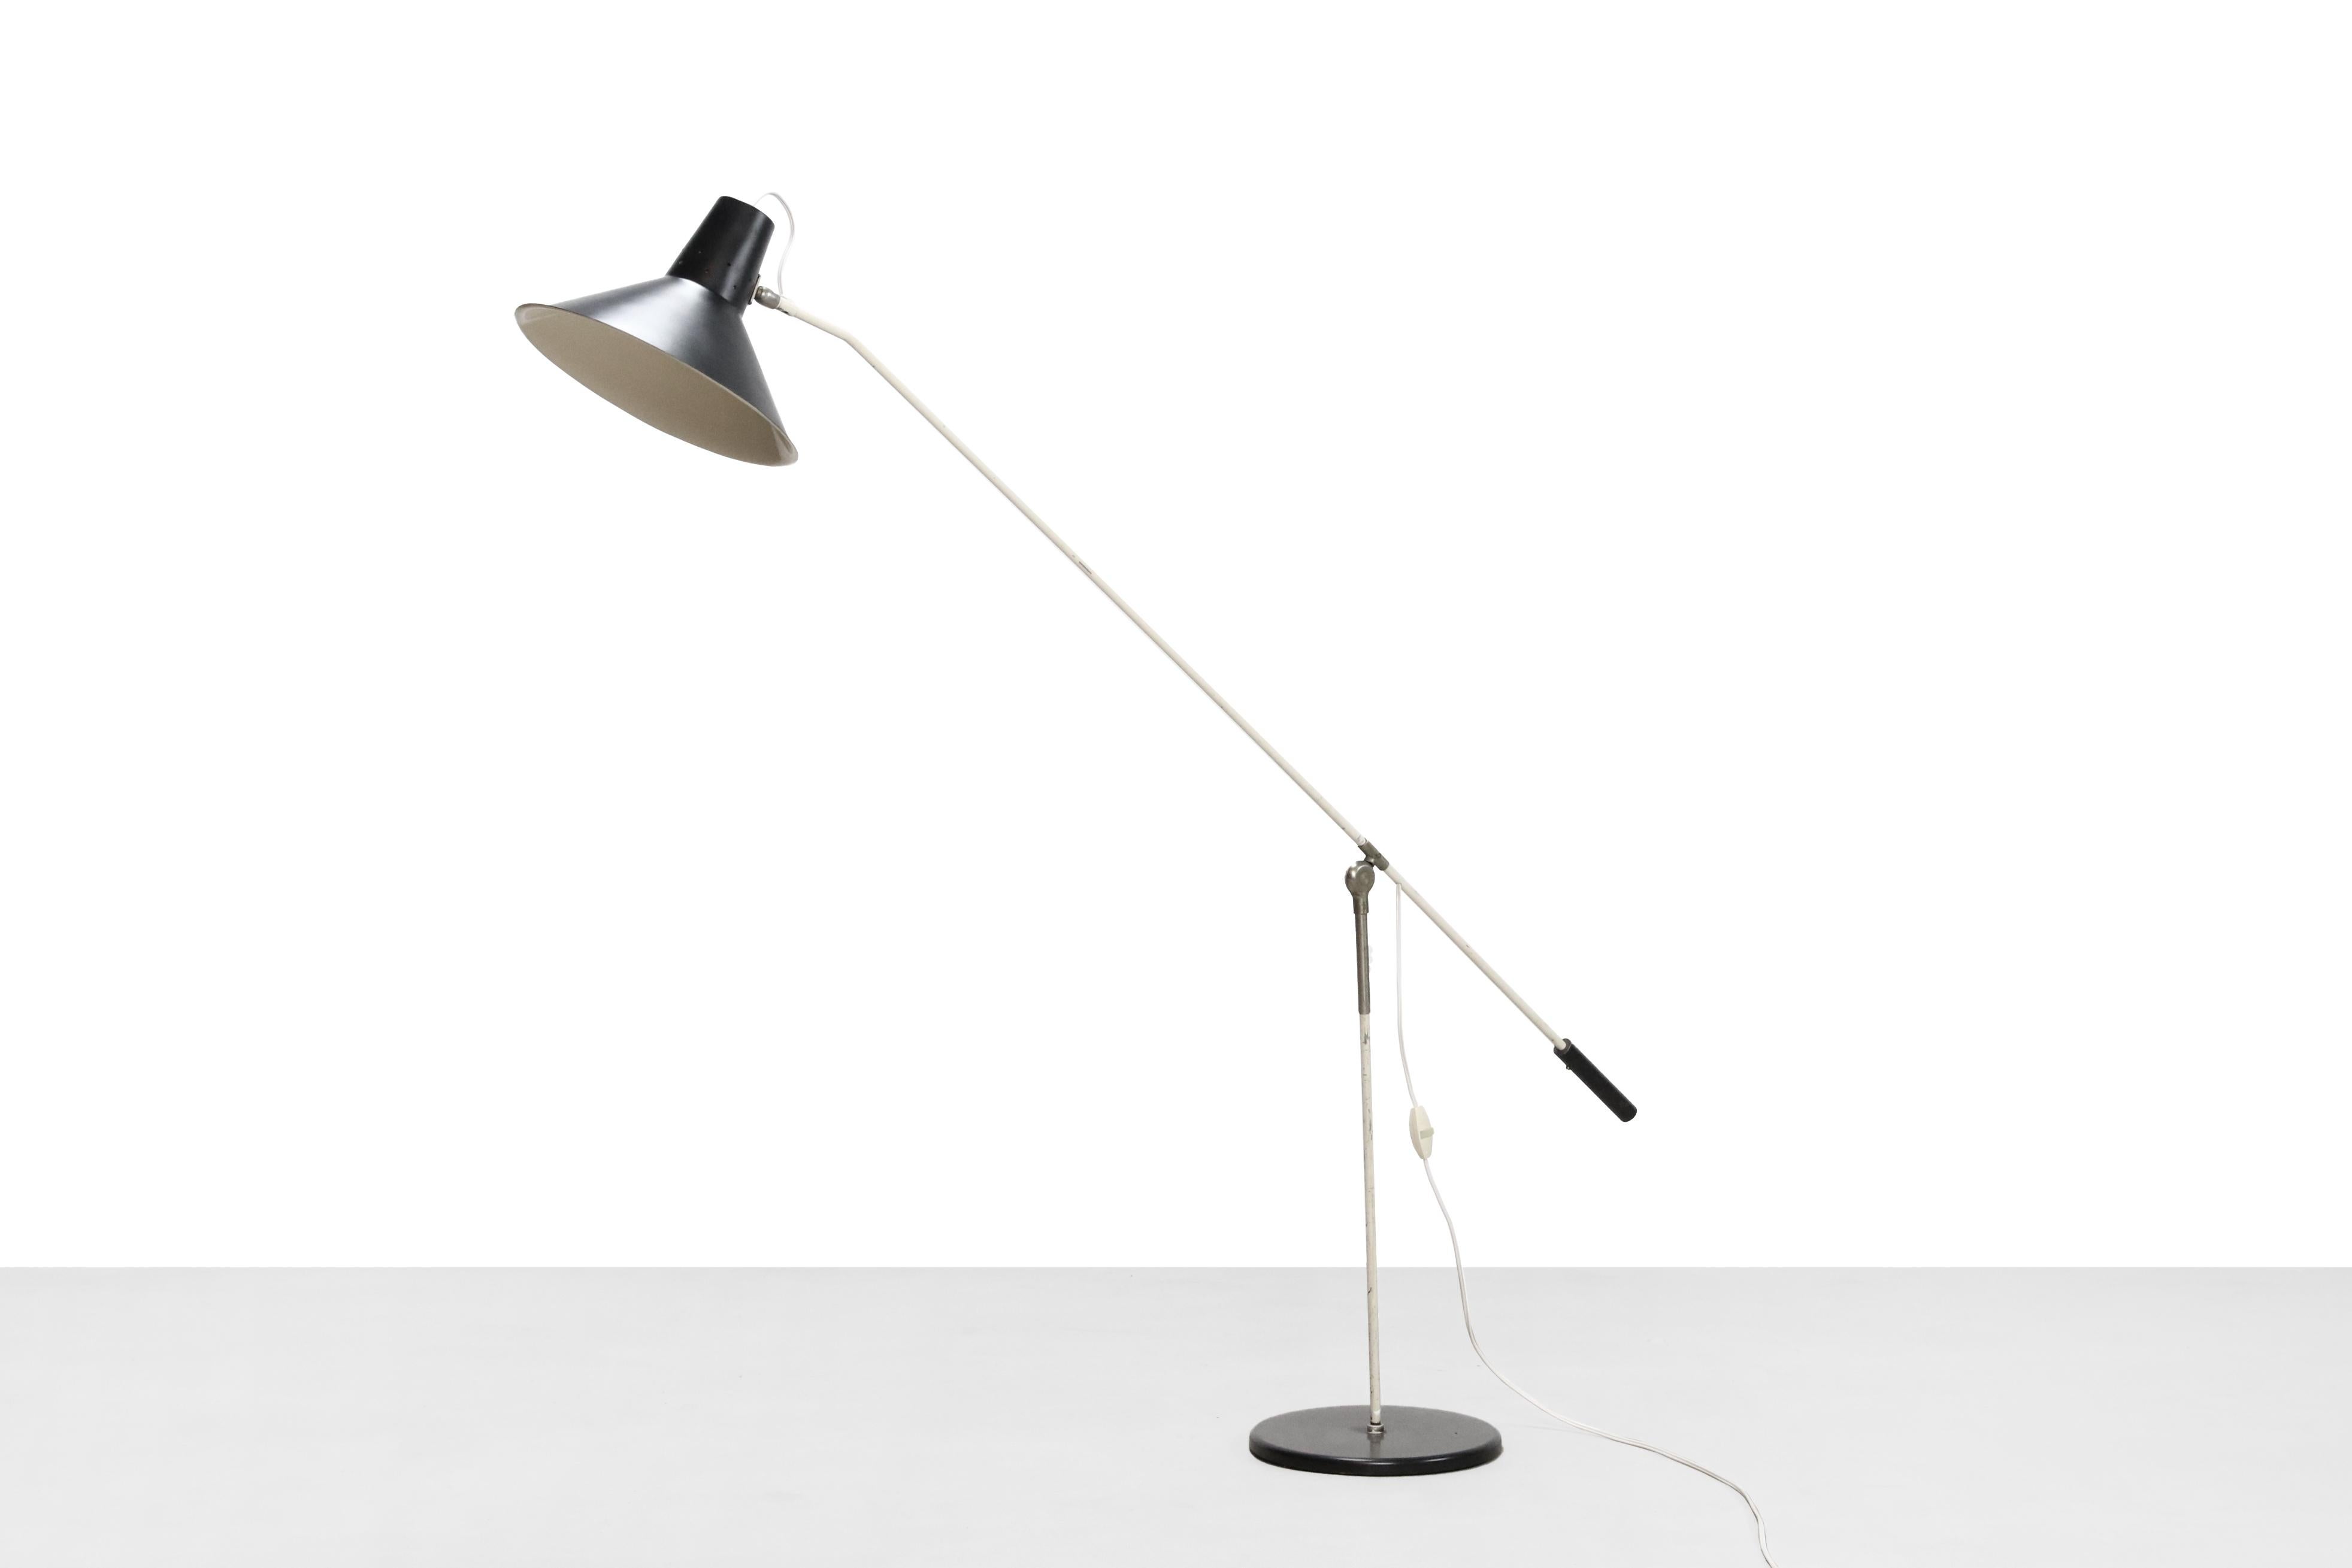 Modernistic floor lamp designed by Dutch designer Willem Hagoort.
This is an early and rare model for Hagoort Lighting and a wonderful example of Dutch design.
This floor lamp is made from black and white lacquered metal.